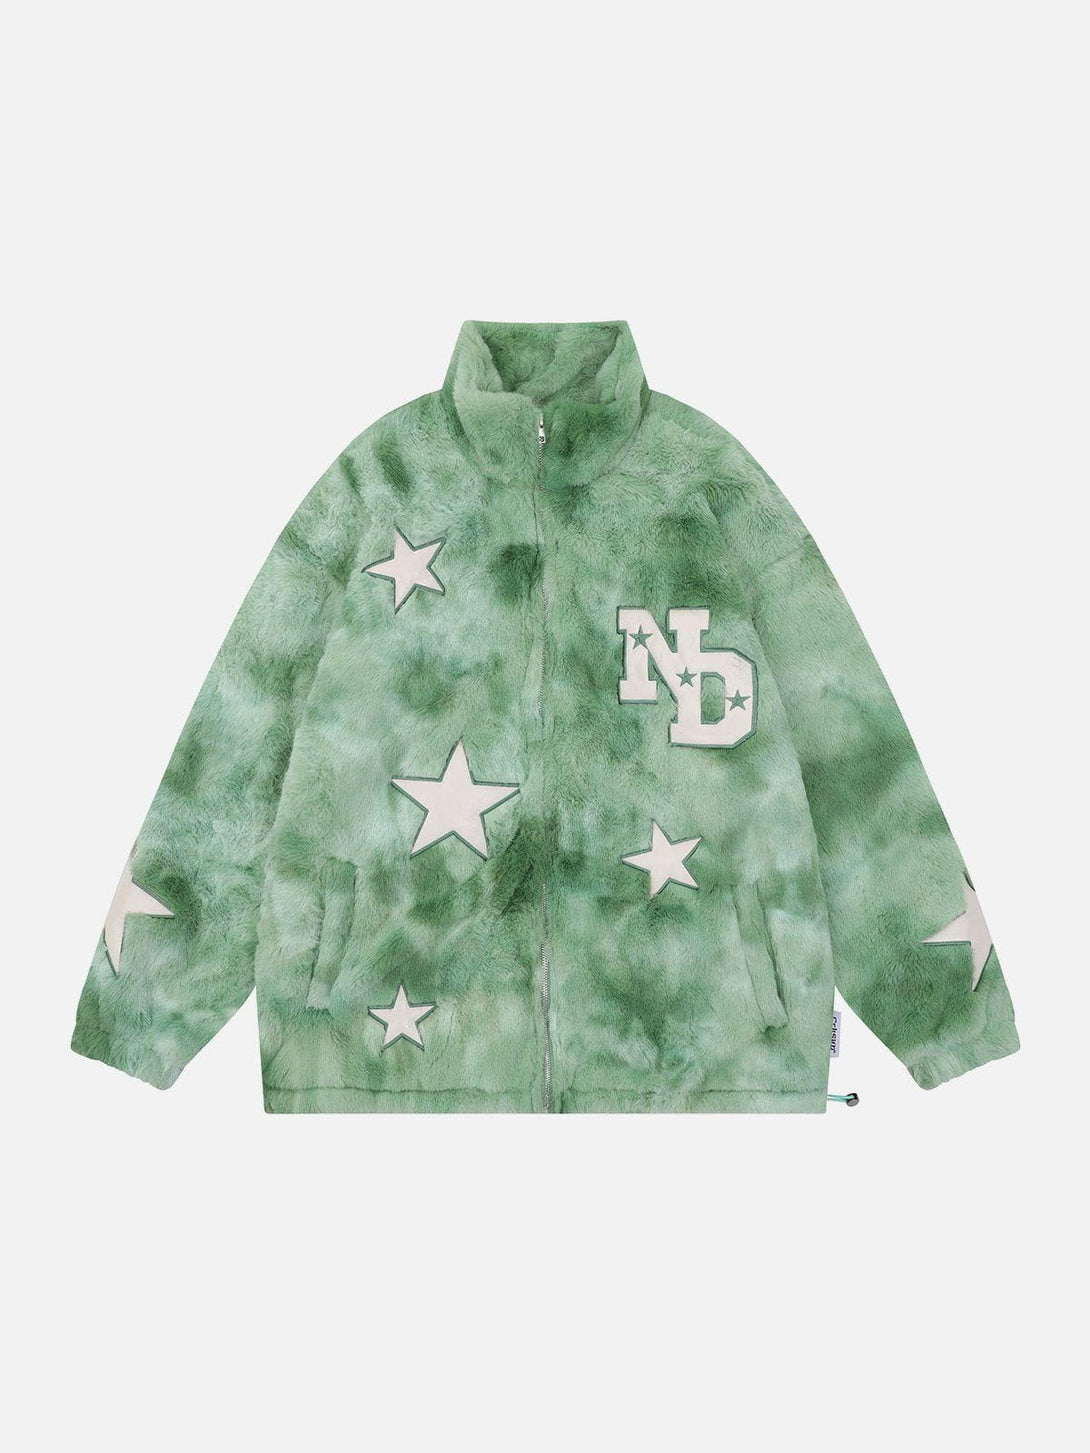 Levefly - Star Embroidered Plush Winter Coat - Streetwear Fashion - levefly.com